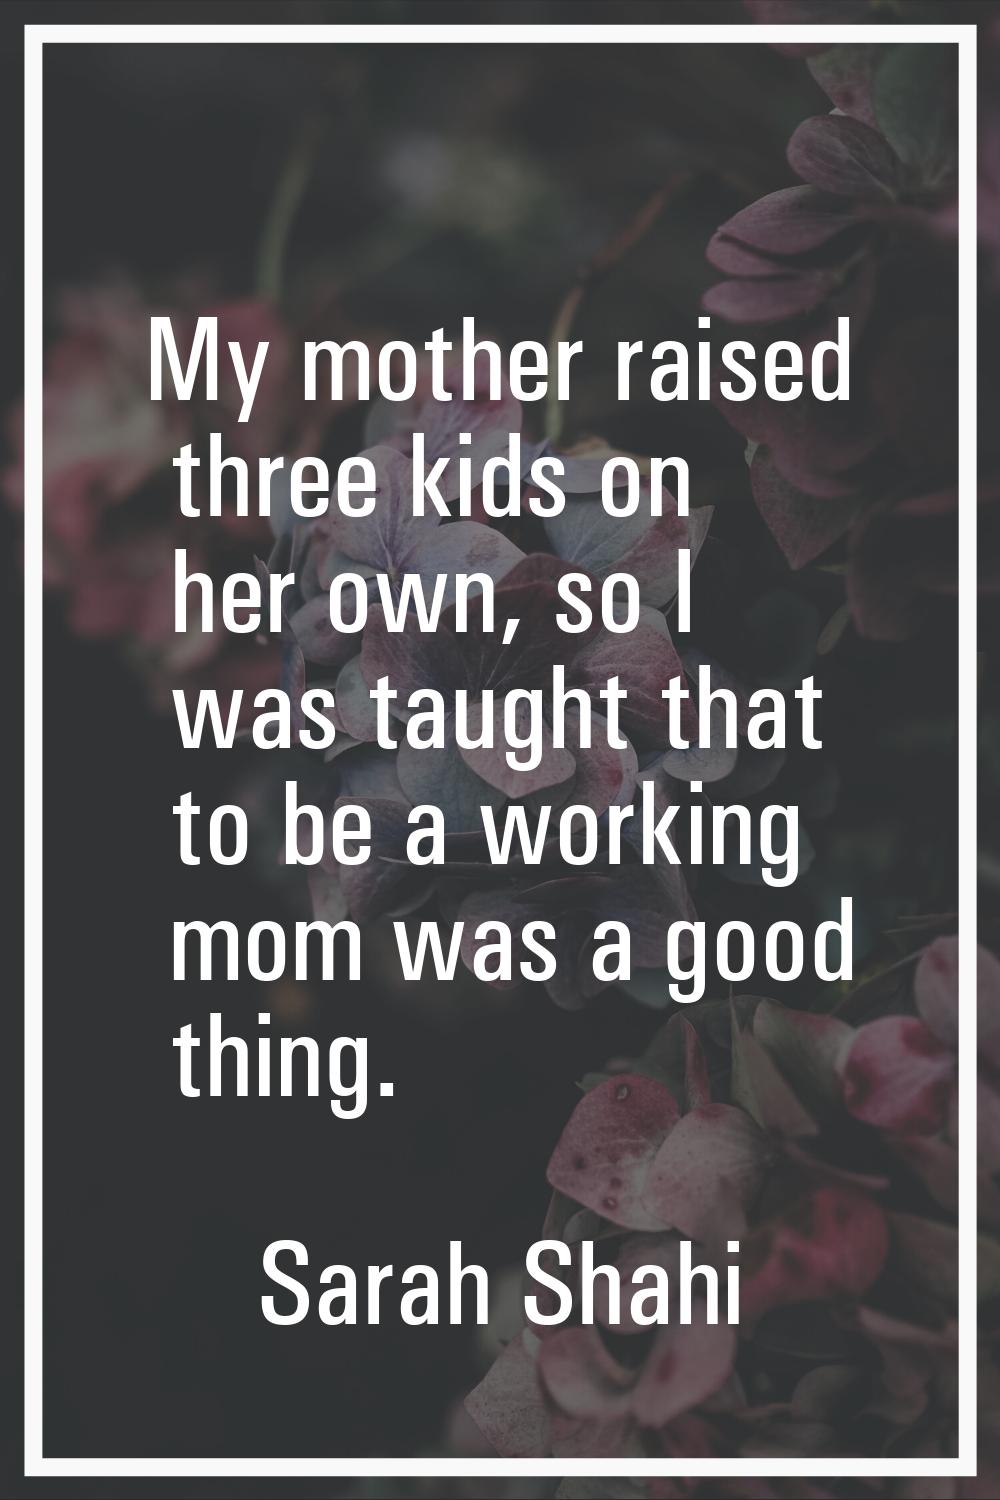 My mother raised three kids on her own, so I was taught that to be a working mom was a good thing.